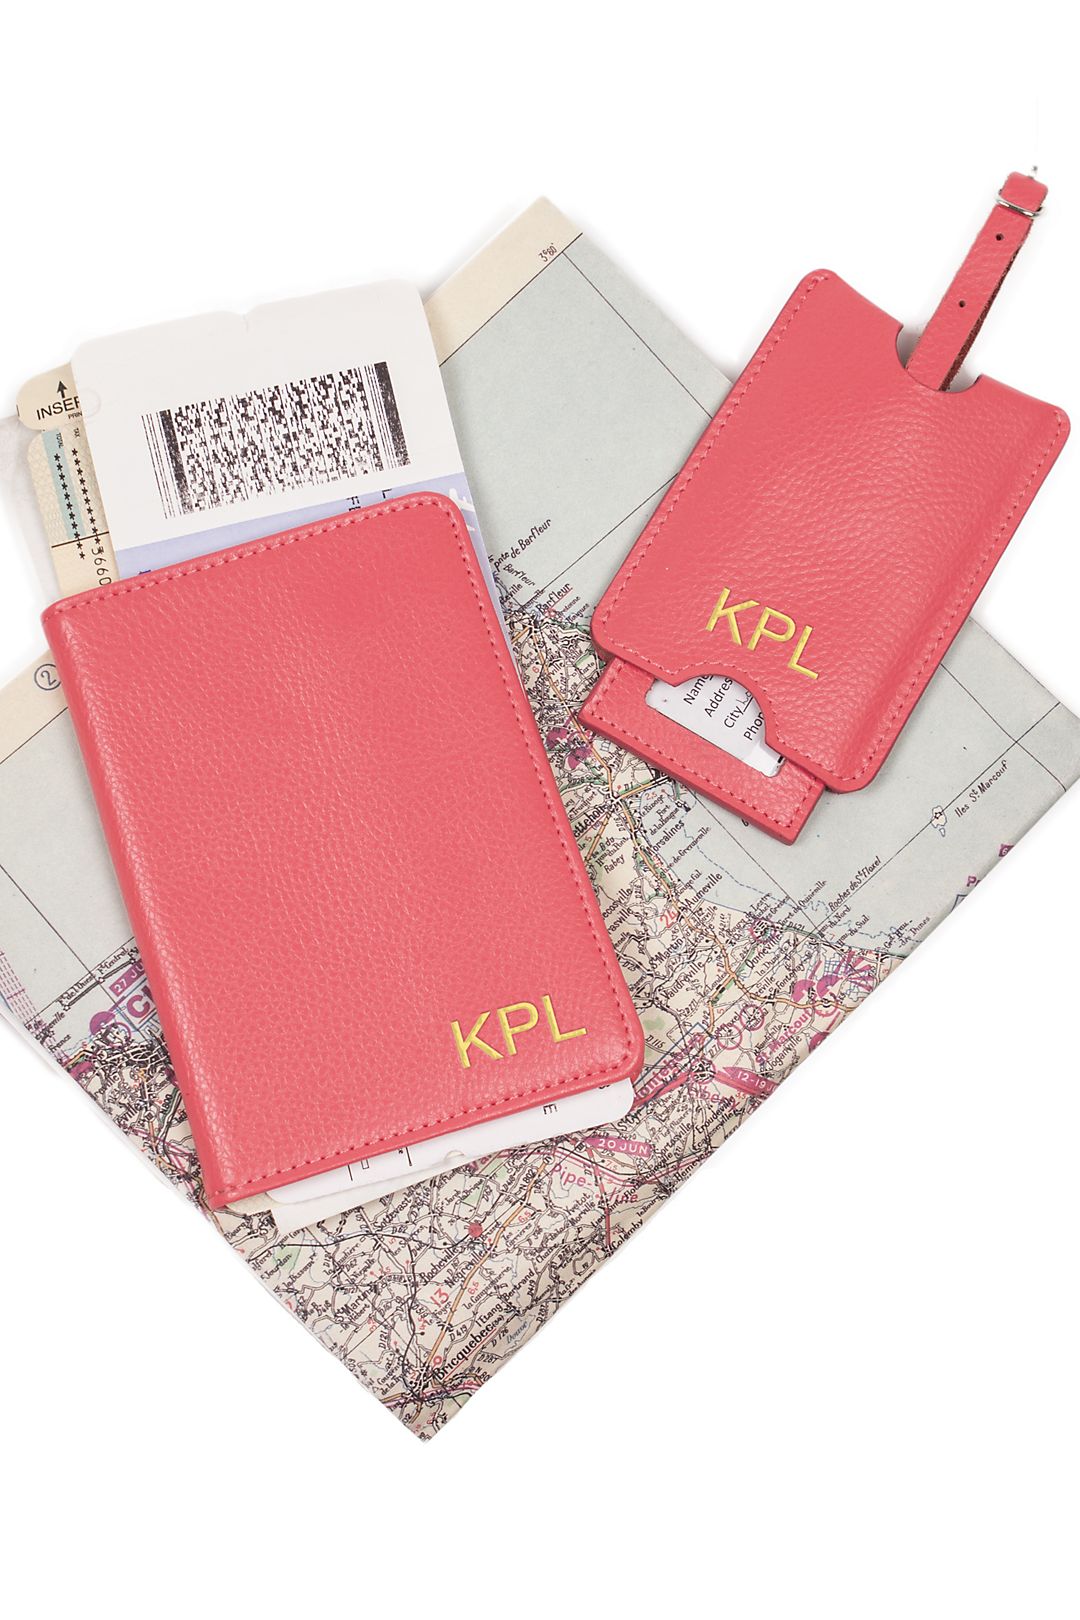 Personalized Monogrammed Antique Saddle Leather Passport Wallet and Luggage Tag